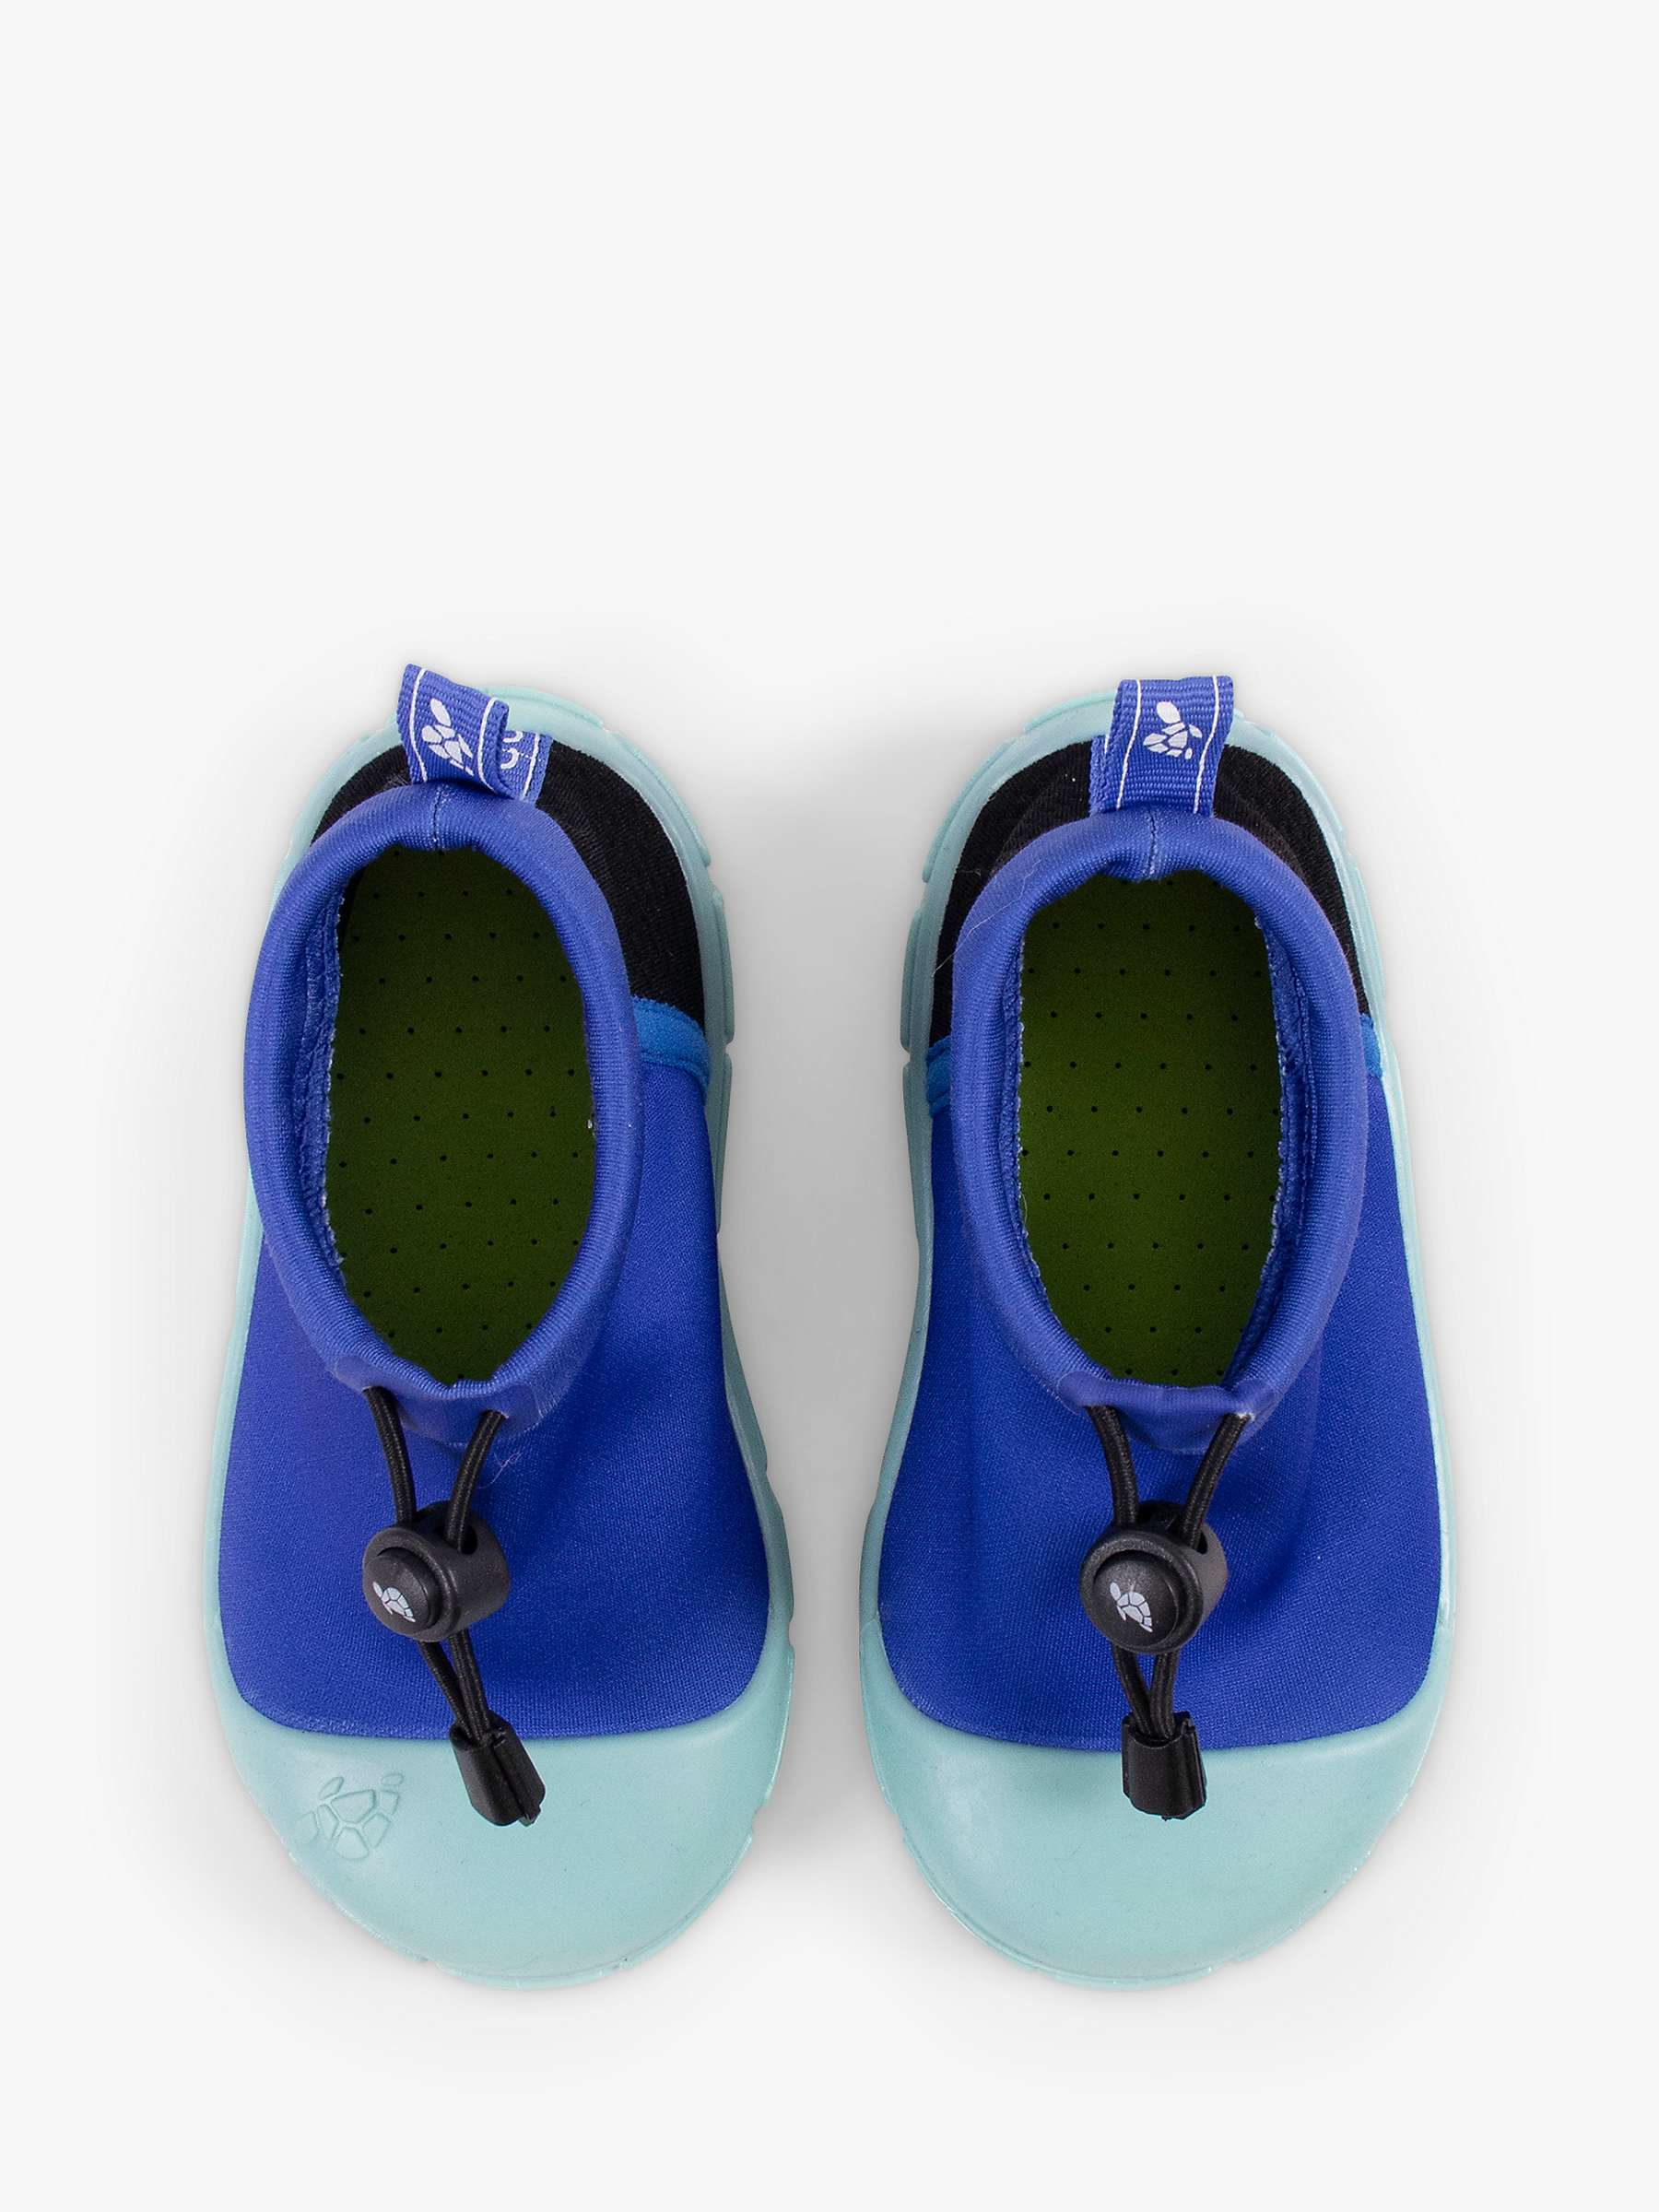 Buy Turtl Kids' Recycled Toggle Aqua Shoes Online at johnlewis.com